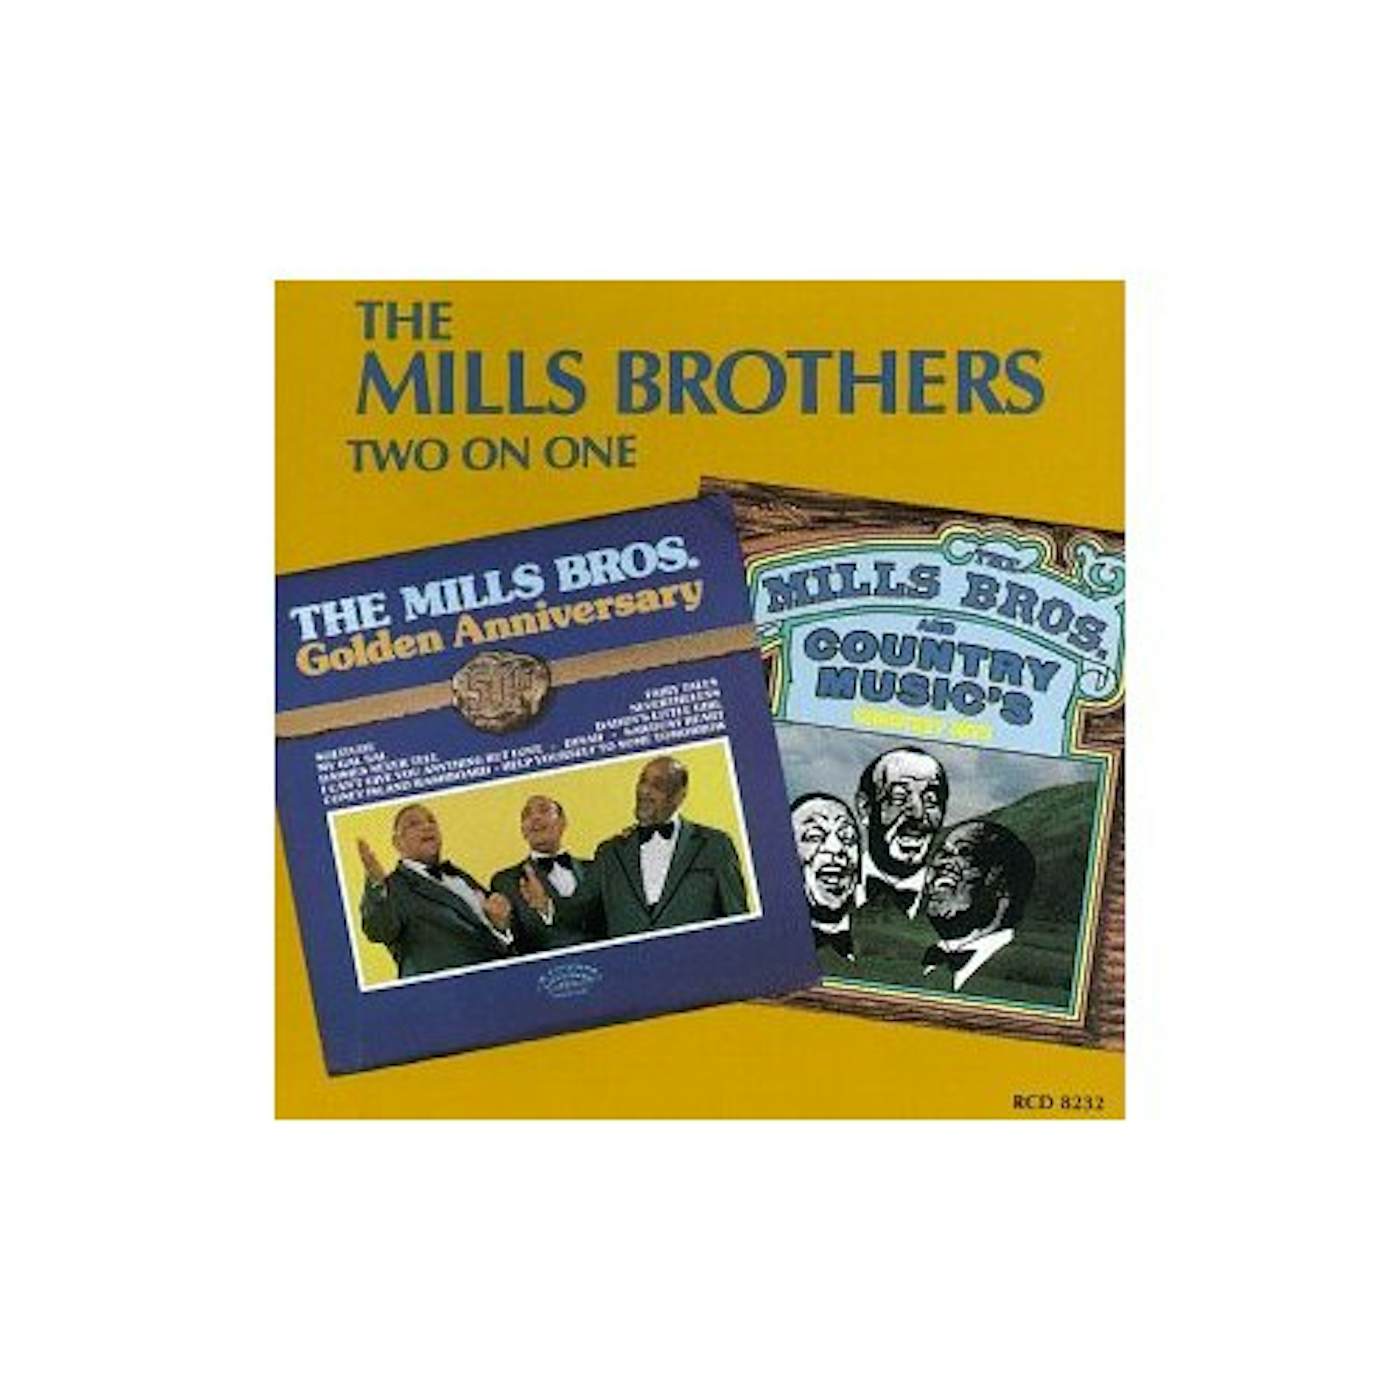 The Mills Brothers 2-ON-1 CD